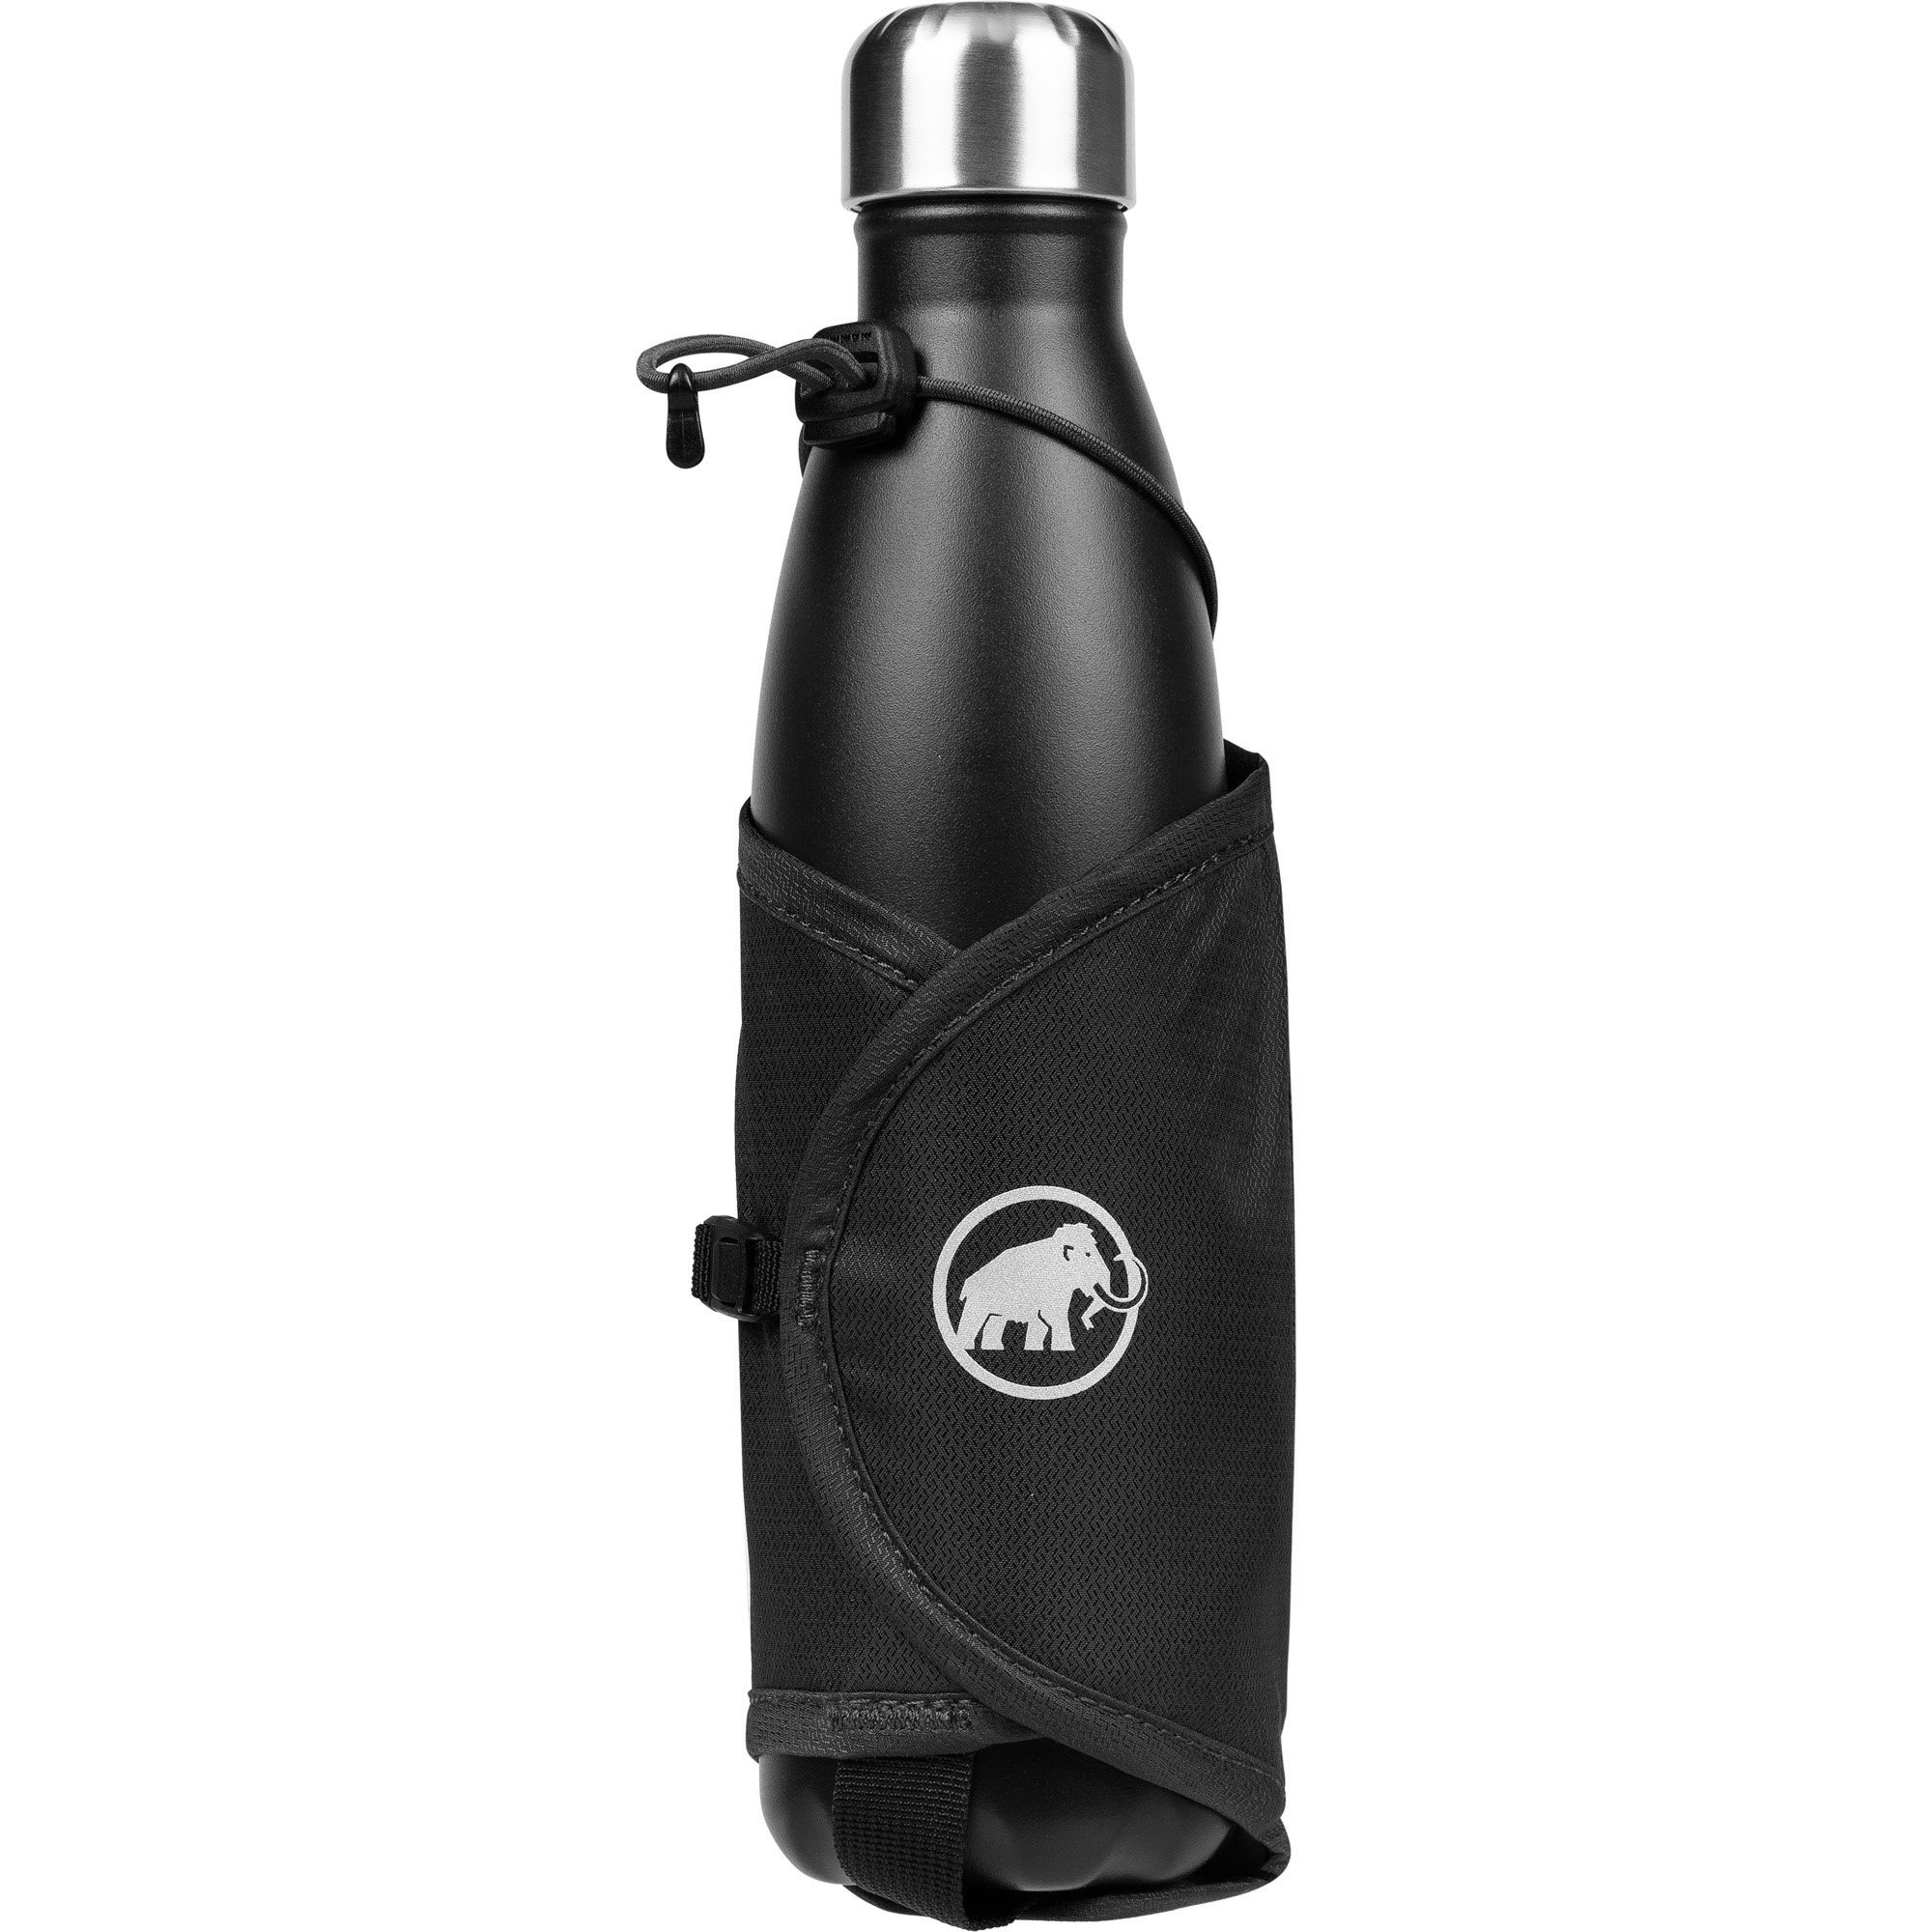 Mammut Lithium Add-on Bottle Holder Backpack Attachment